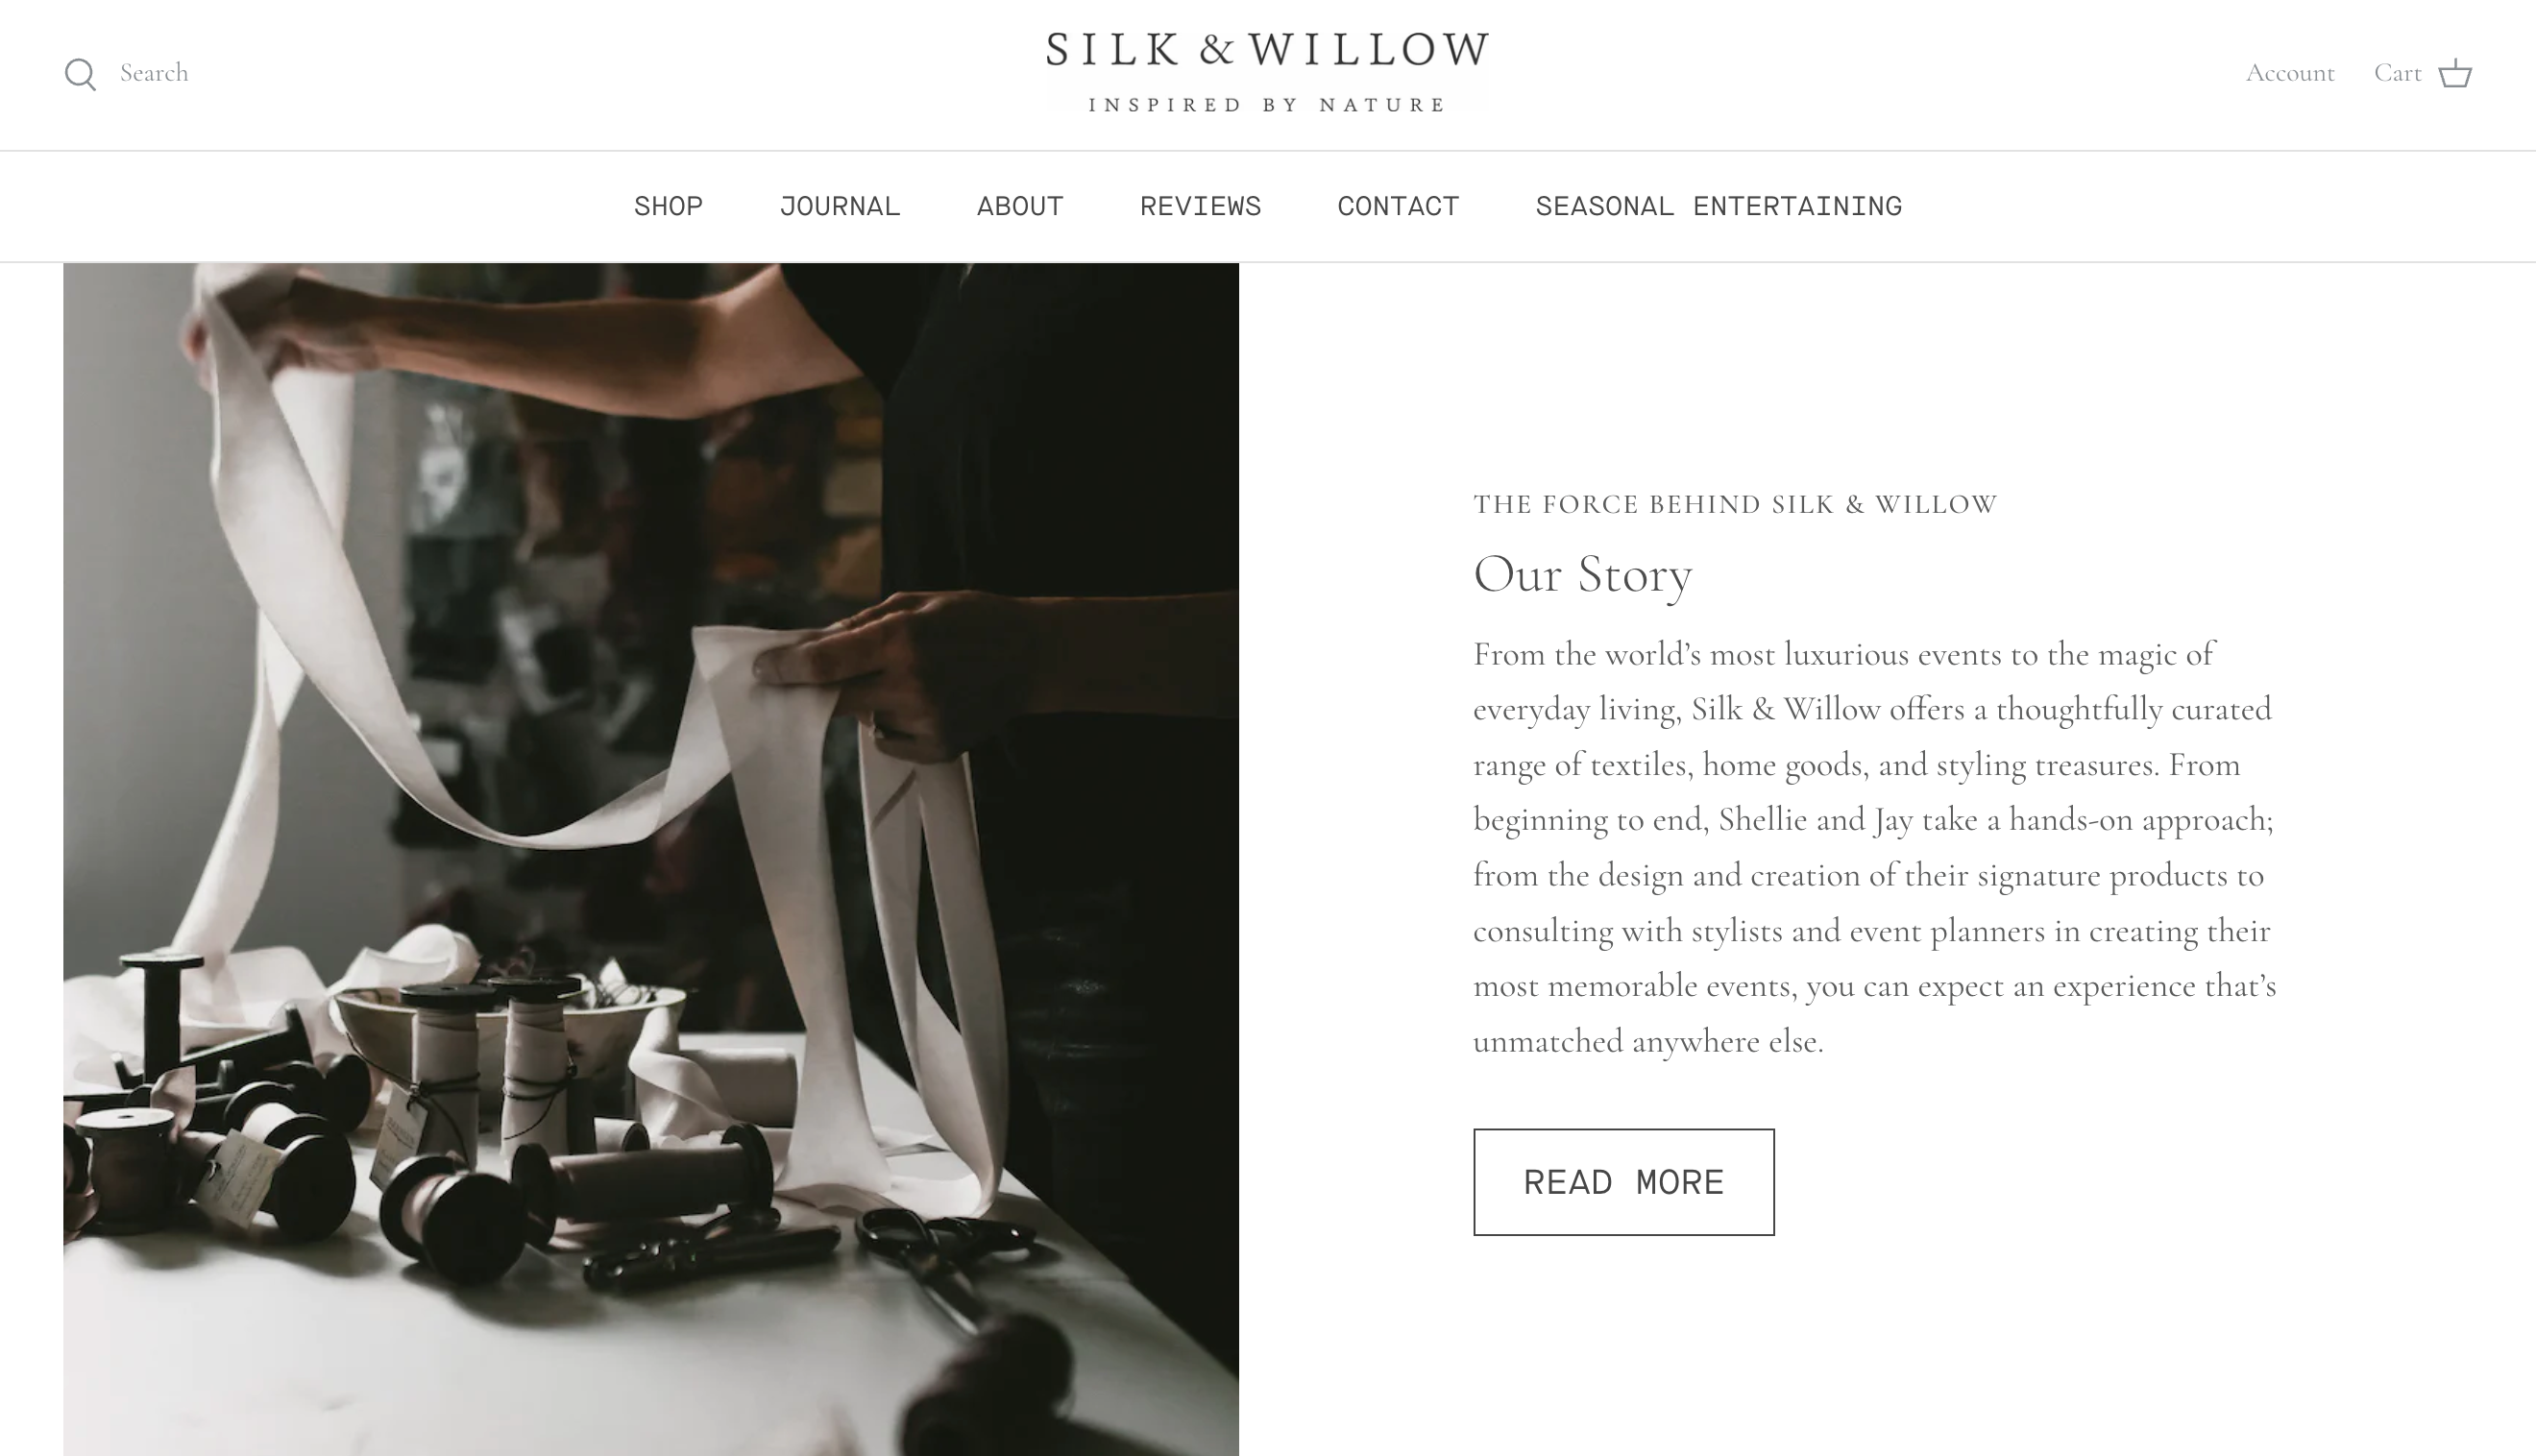 An About us page on Silk & Willow's website